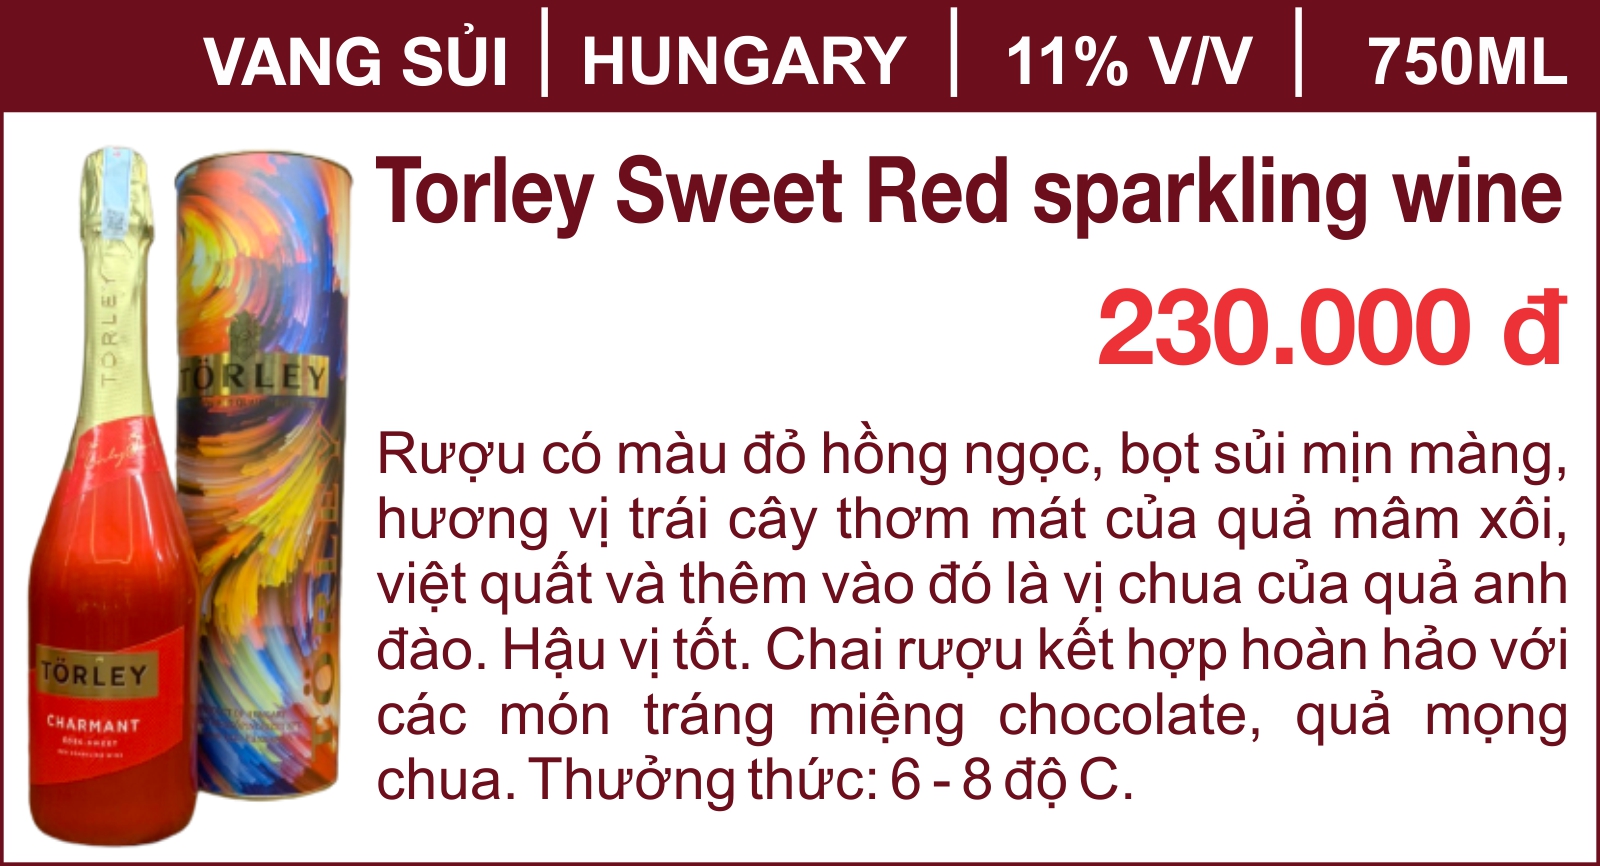 Torley Sweet Red sparkling wine